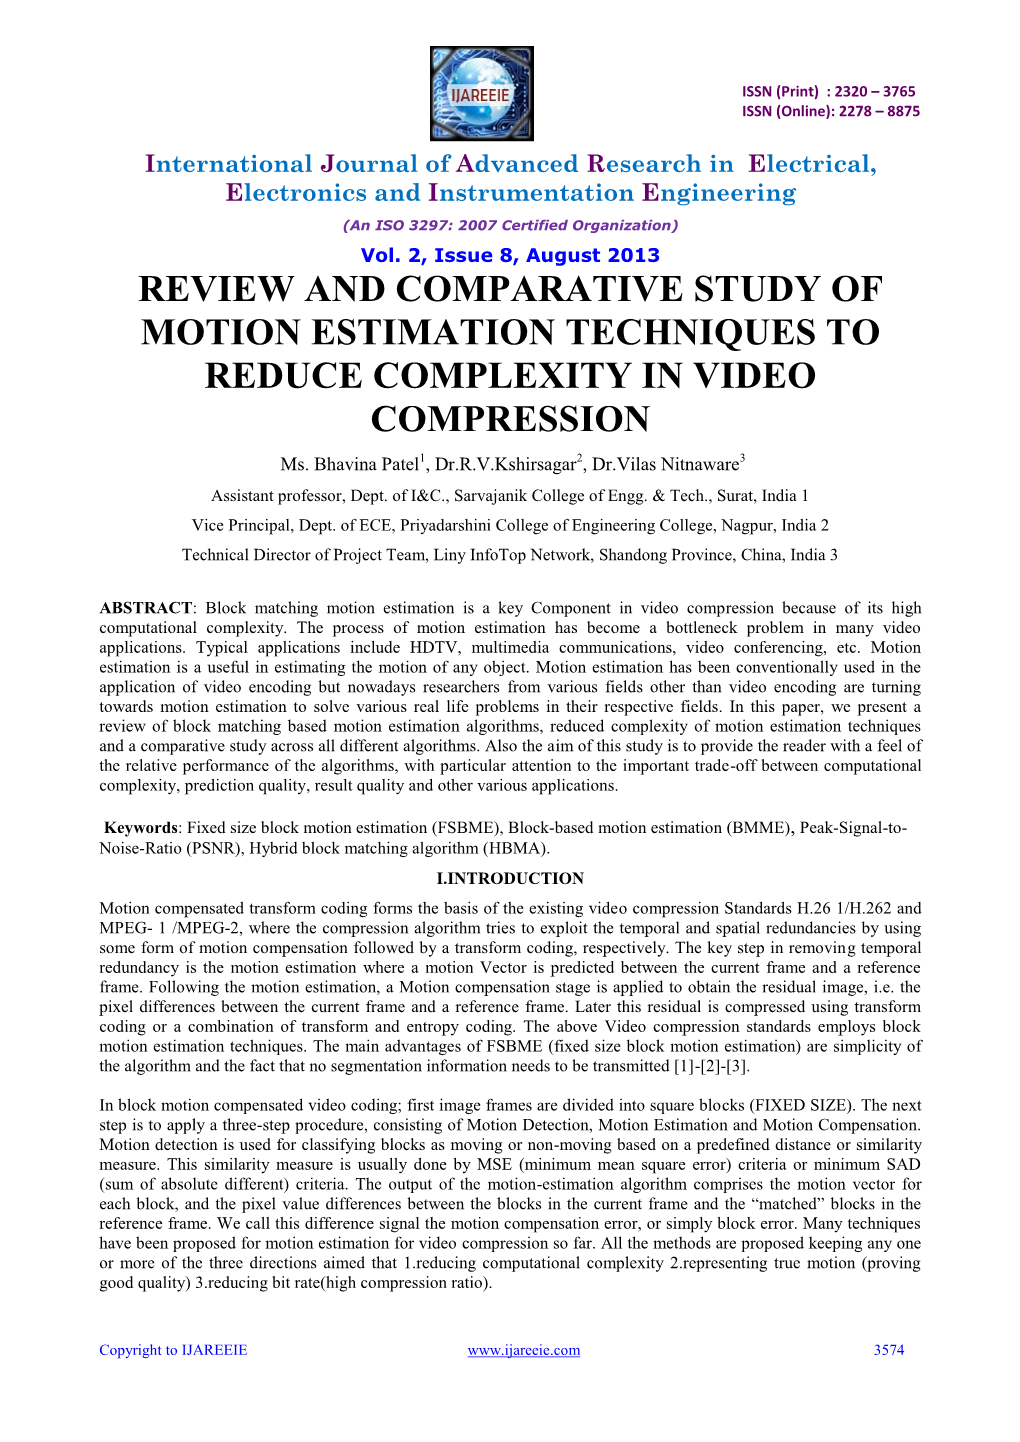 REVIEW and COMPARATIVE STUDY of MOTION ESTIMATION TECHNIQUES to REDUCE COMPLEXITY in VIDEO COMPRESSION Ms